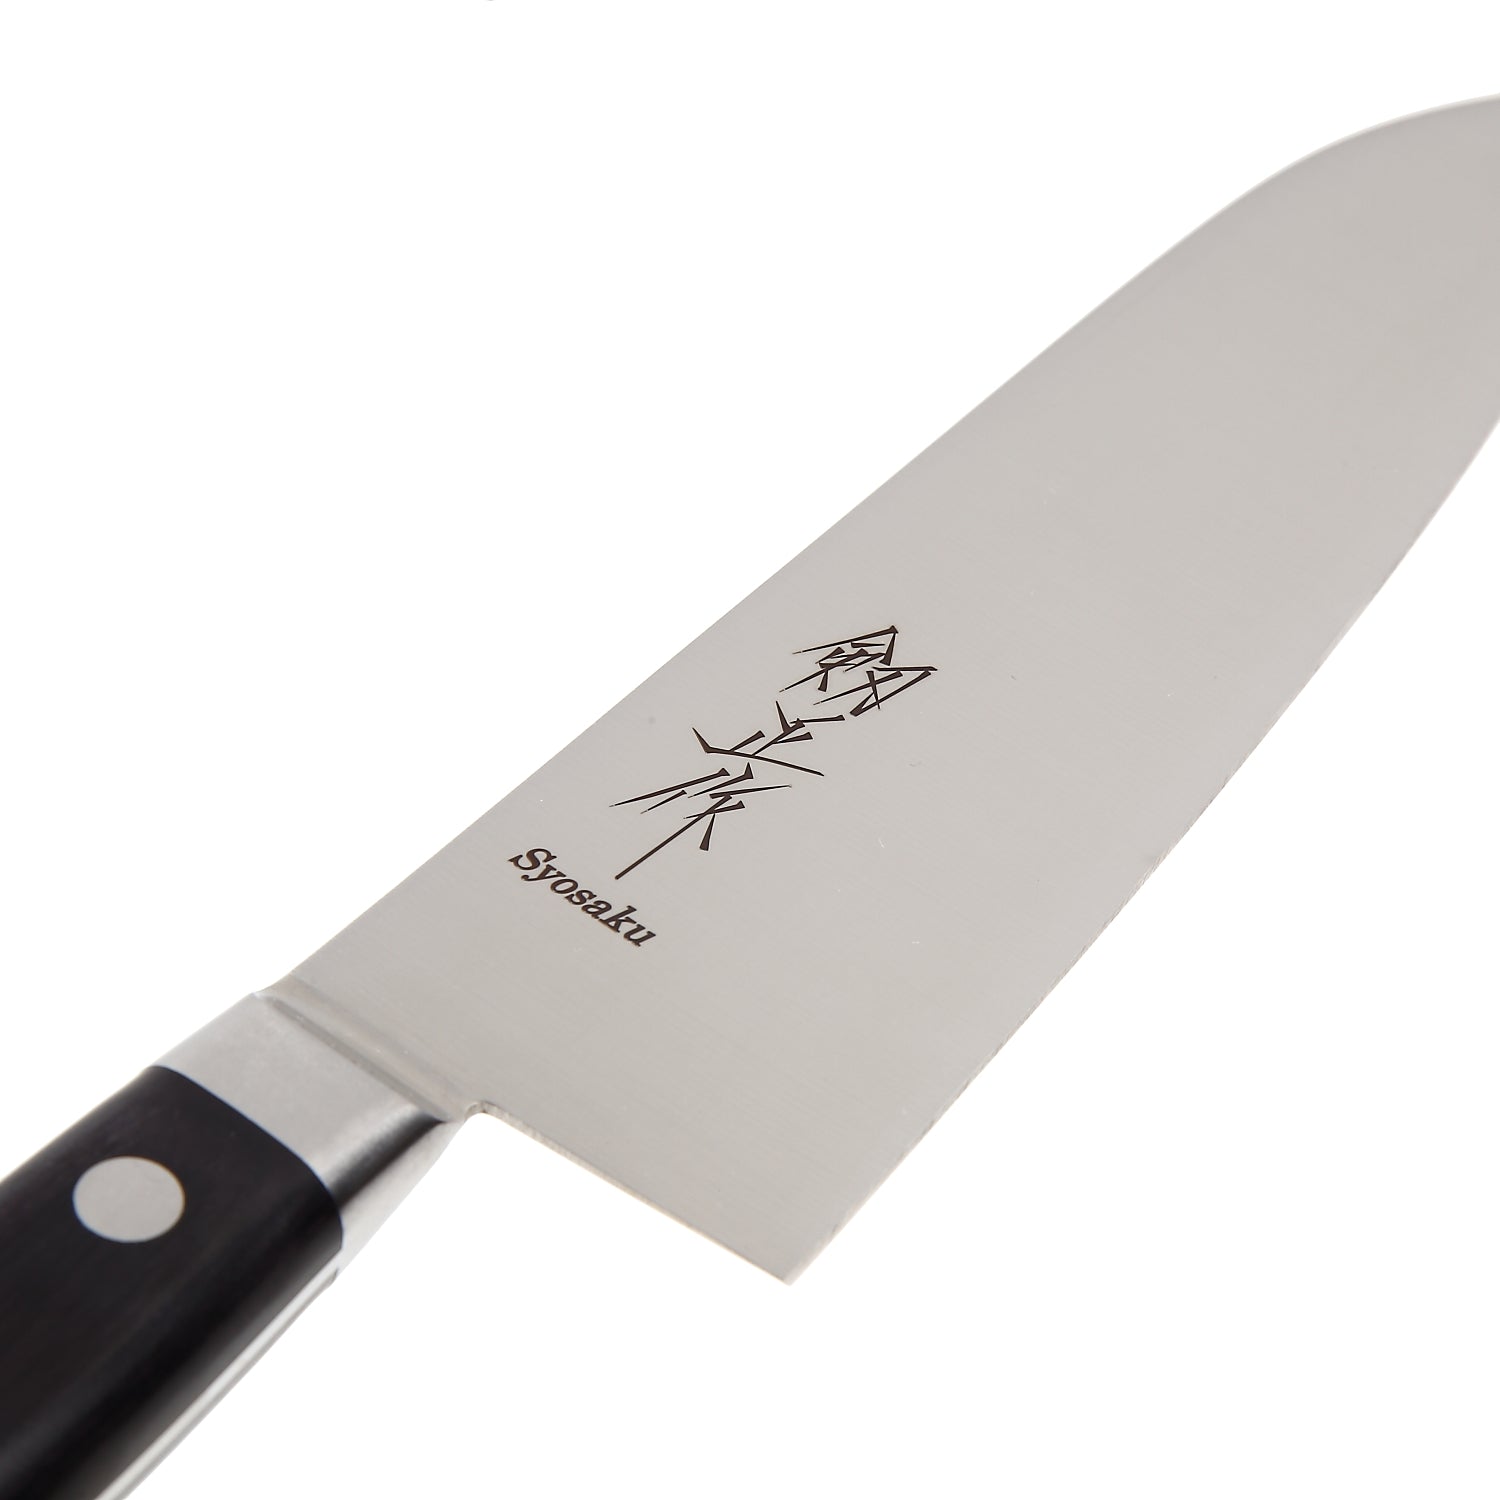  MAD SHARK Santoku Knife 8 Inch, Japanese Chef Knife,  Multi-purpose Kitchen Cooking Knife for Chopping Meat and Vegetables,  Ergonomic 2.0 Handle: Home & Kitchen